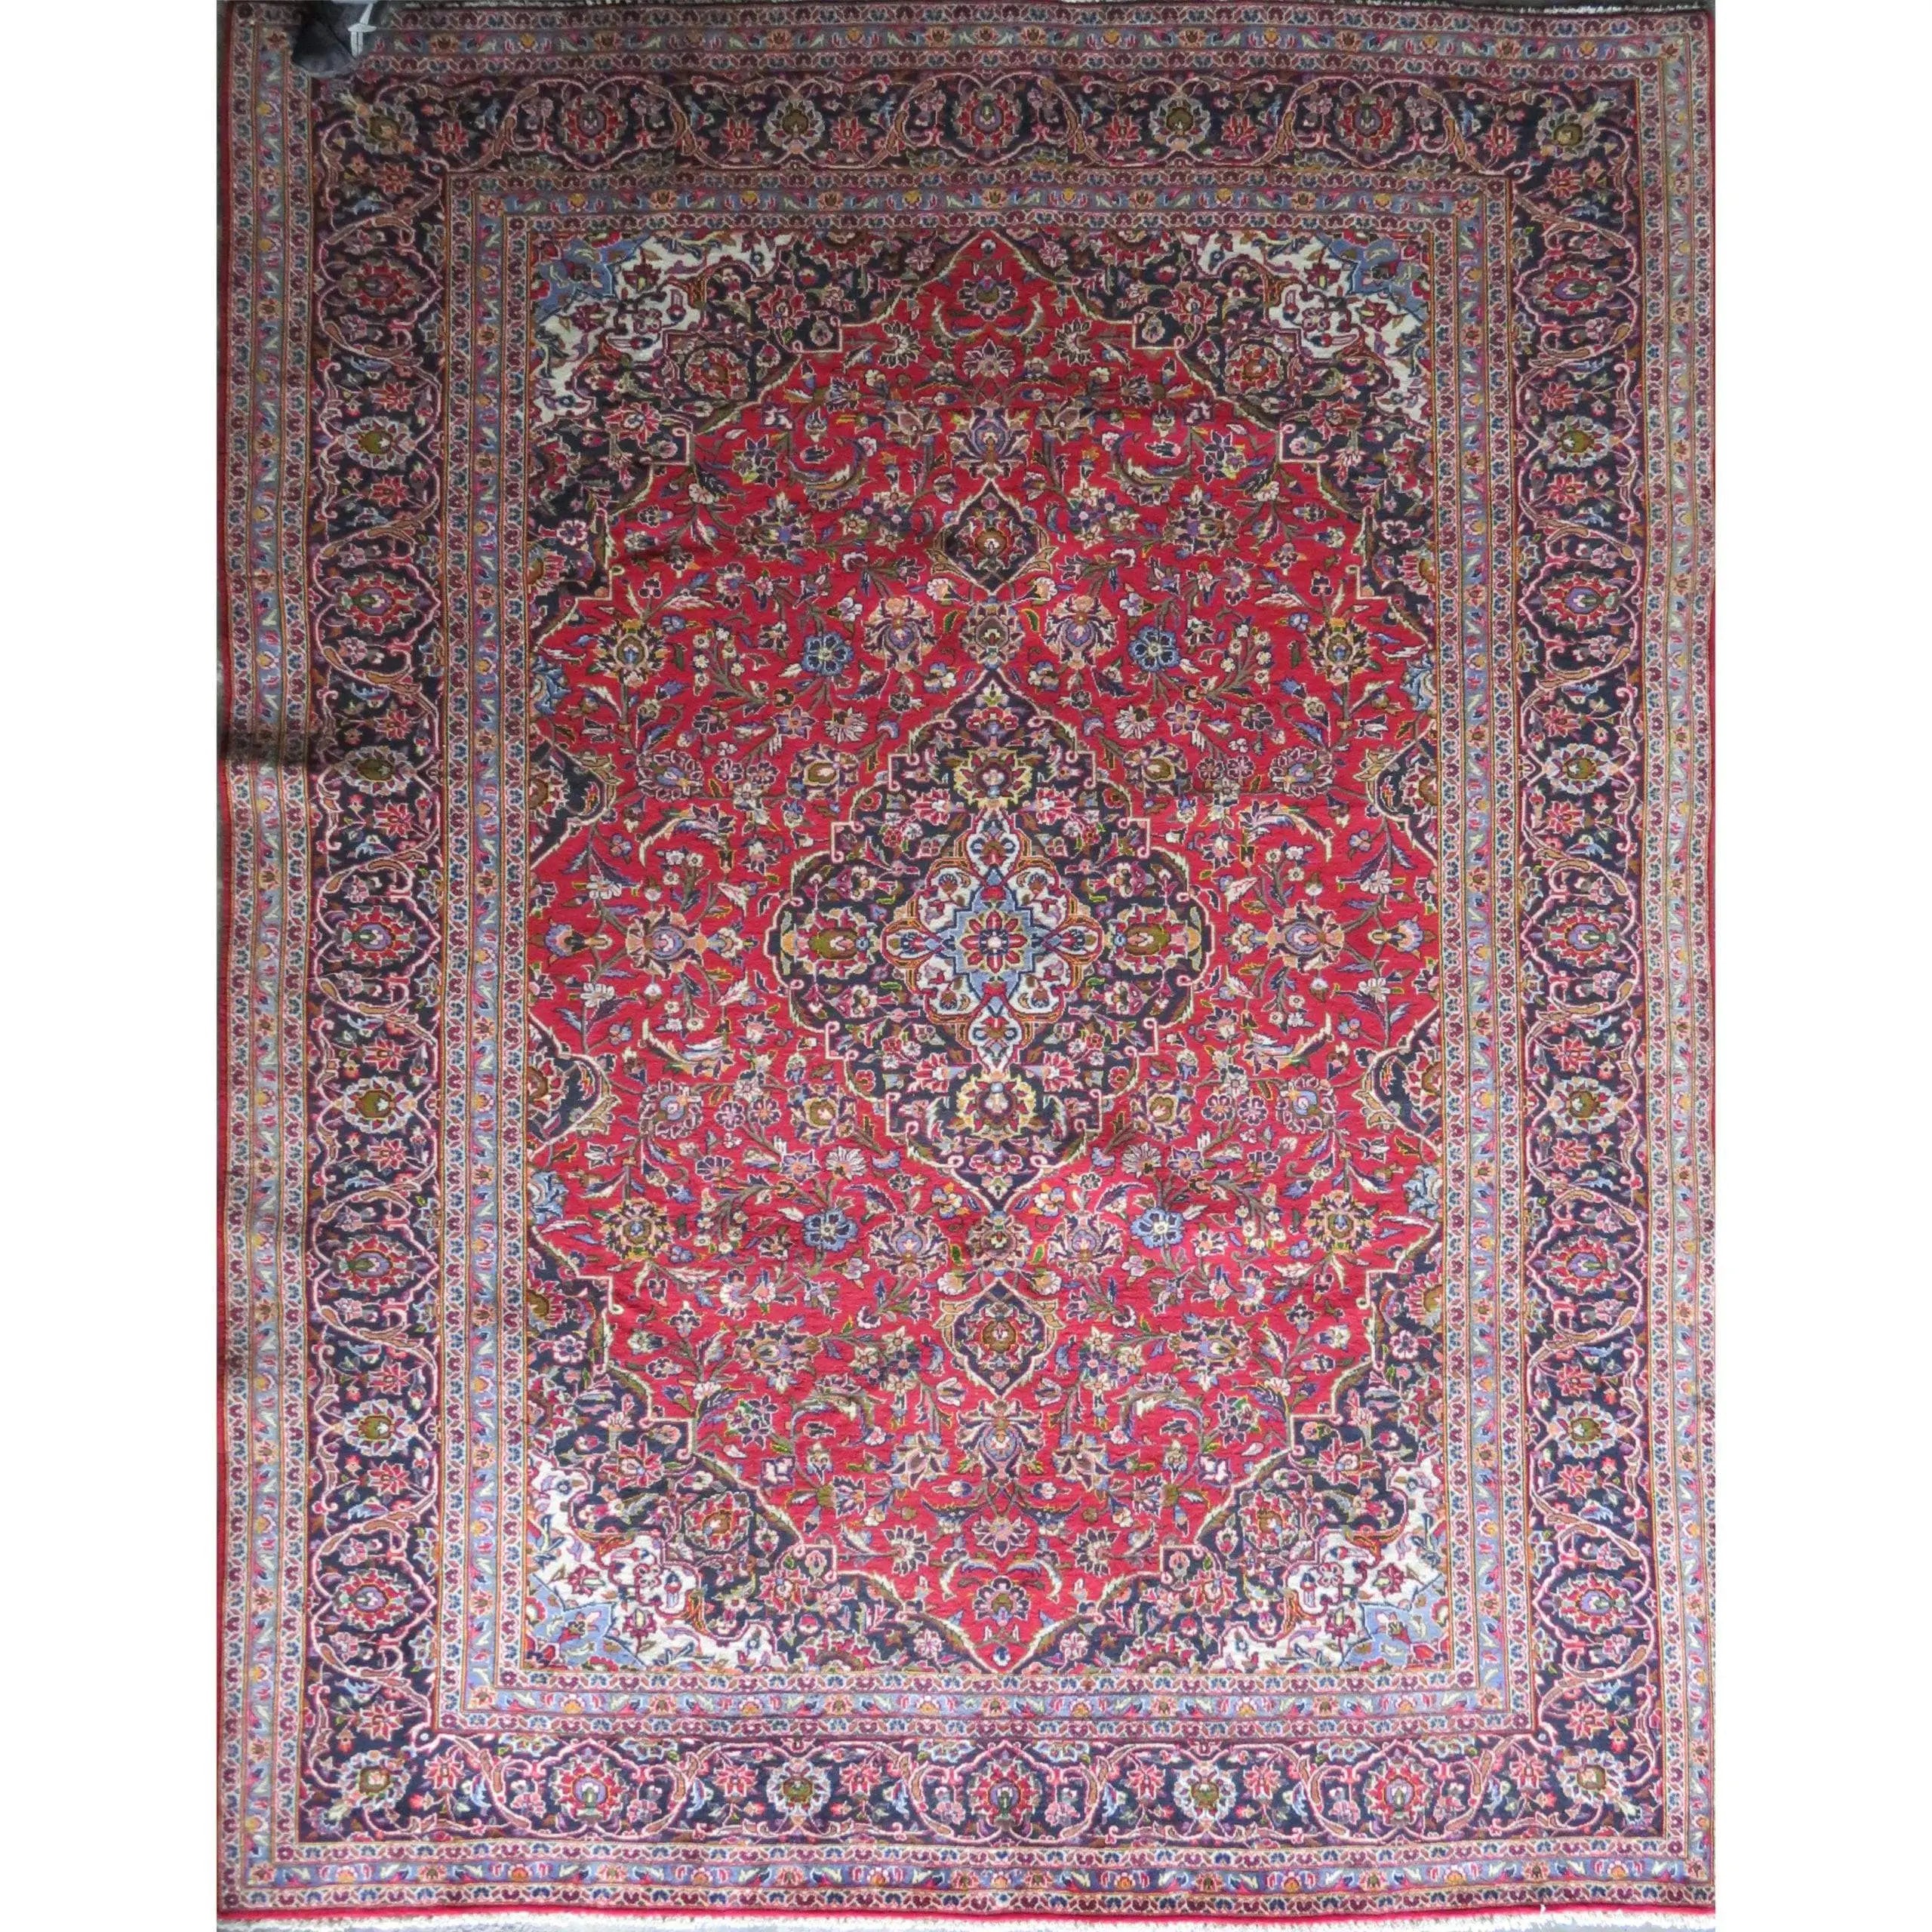 Hand-Knotted Vintage Rug 12'1" x 9'4"